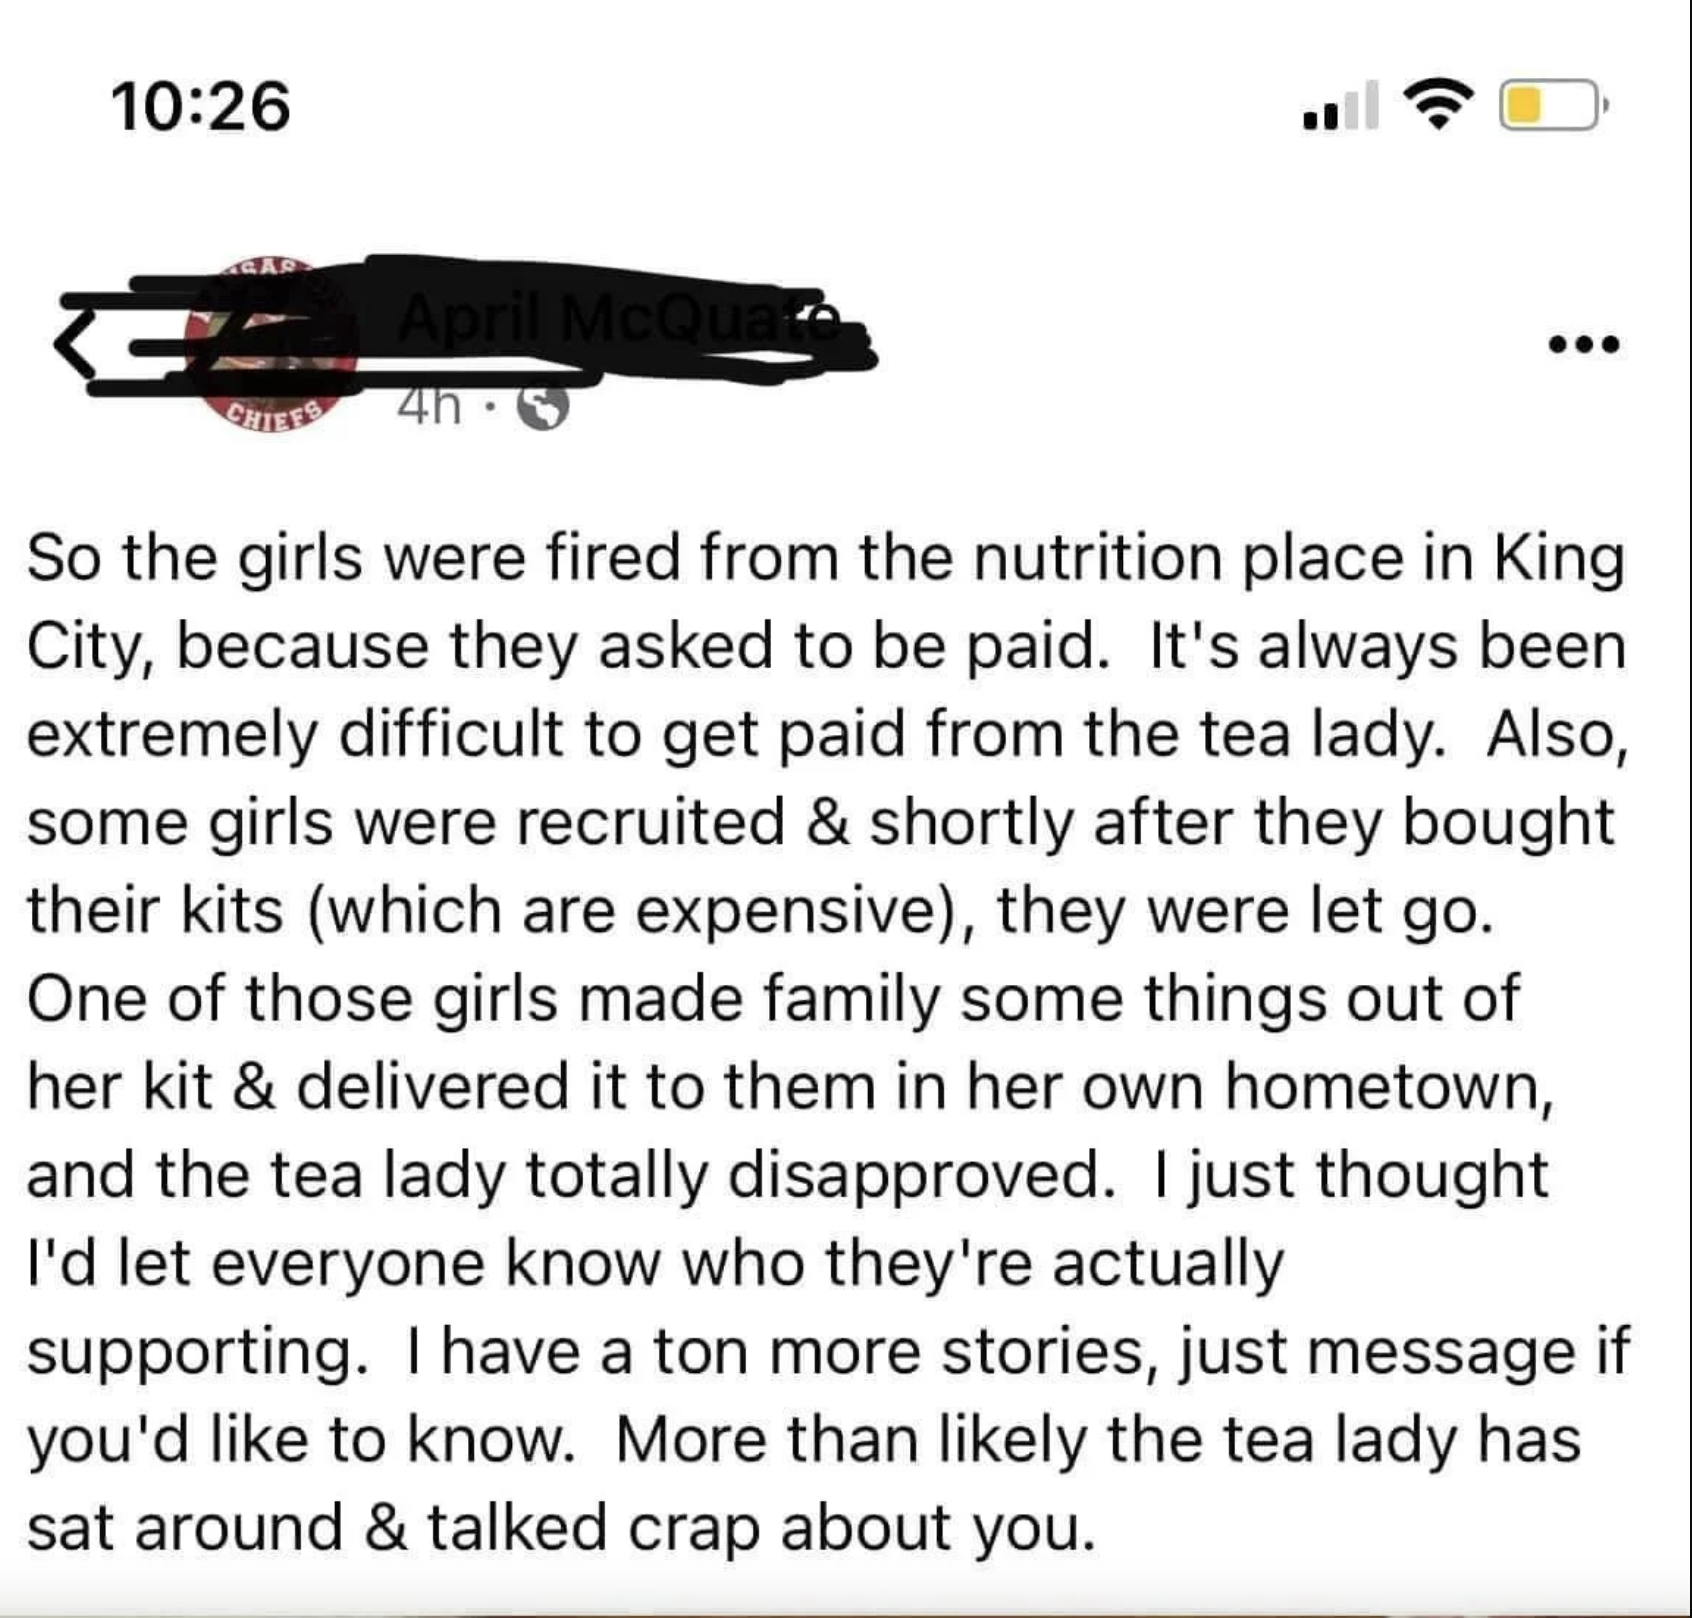 Text saying &quot;the girls&quot; were fired because they asked to be paid and it&#x27;s always been very hard to get paid by the tea lady, and some girls were recruited and let go shortly after they bought their expensive kits